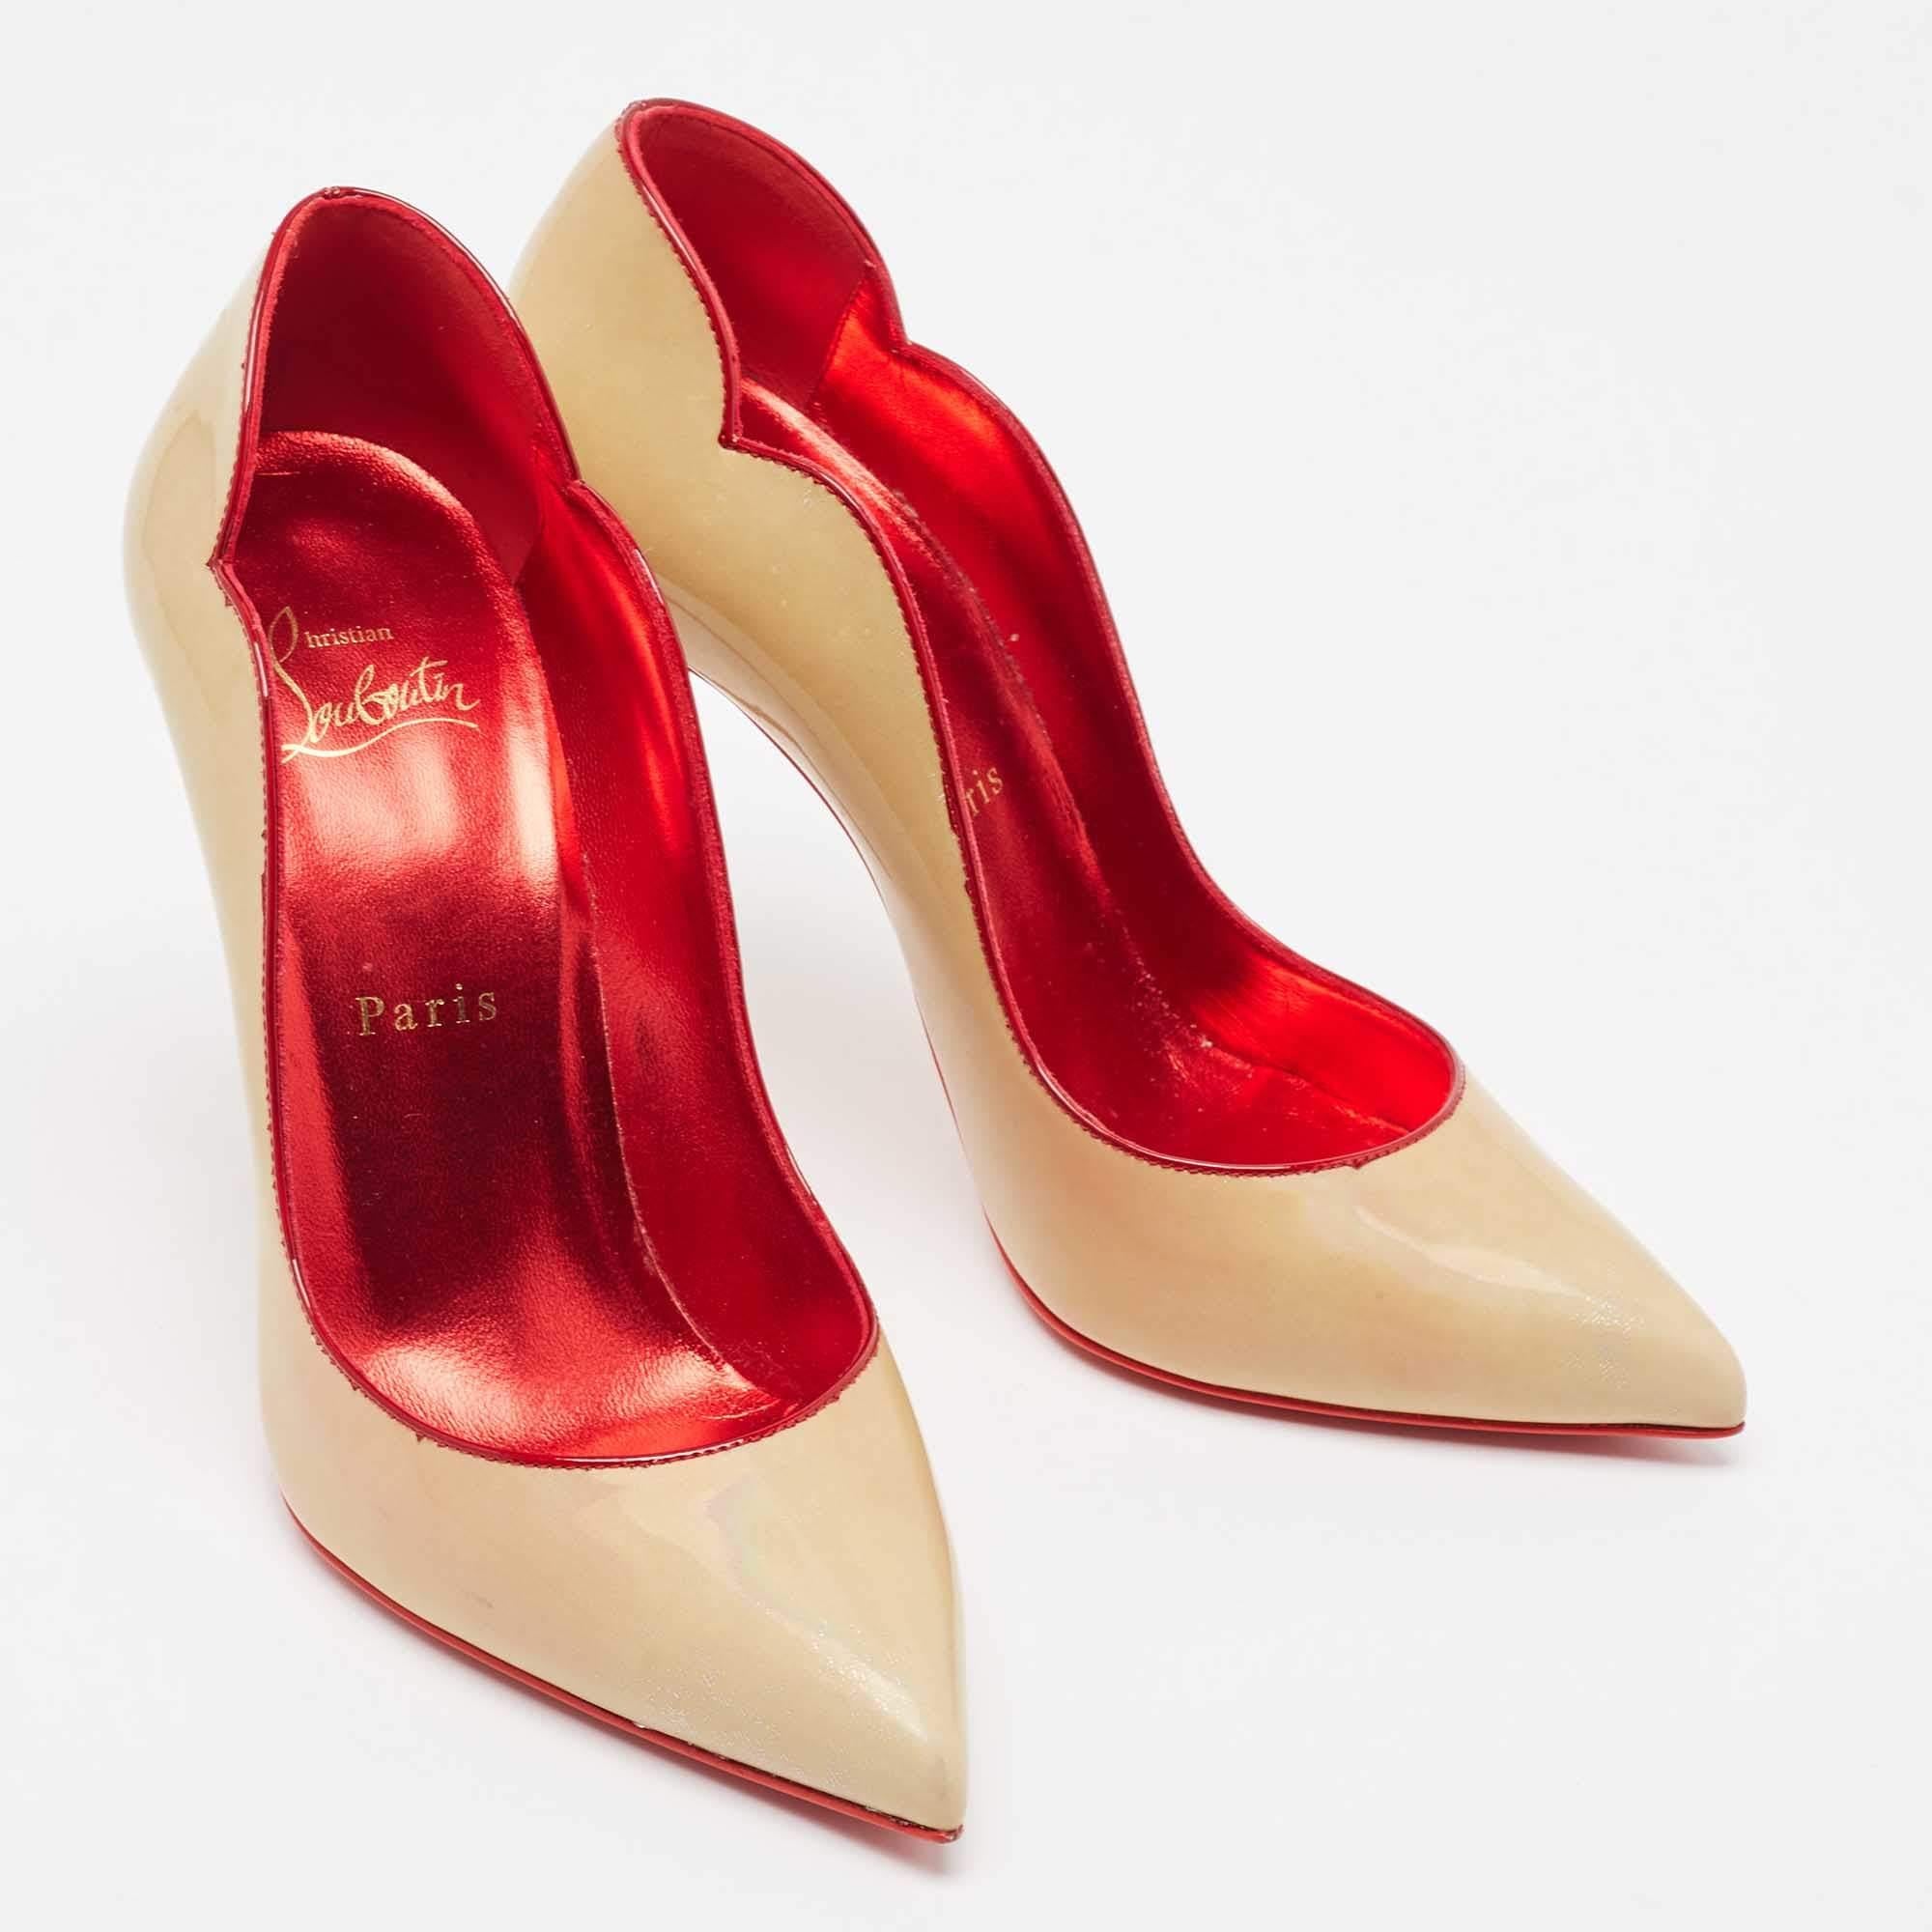 Christian Louboutin Beige Patent Leather Hot Chick Pumps Size 37.5 In New Condition For Sale In Dubai, Al Qouz 2